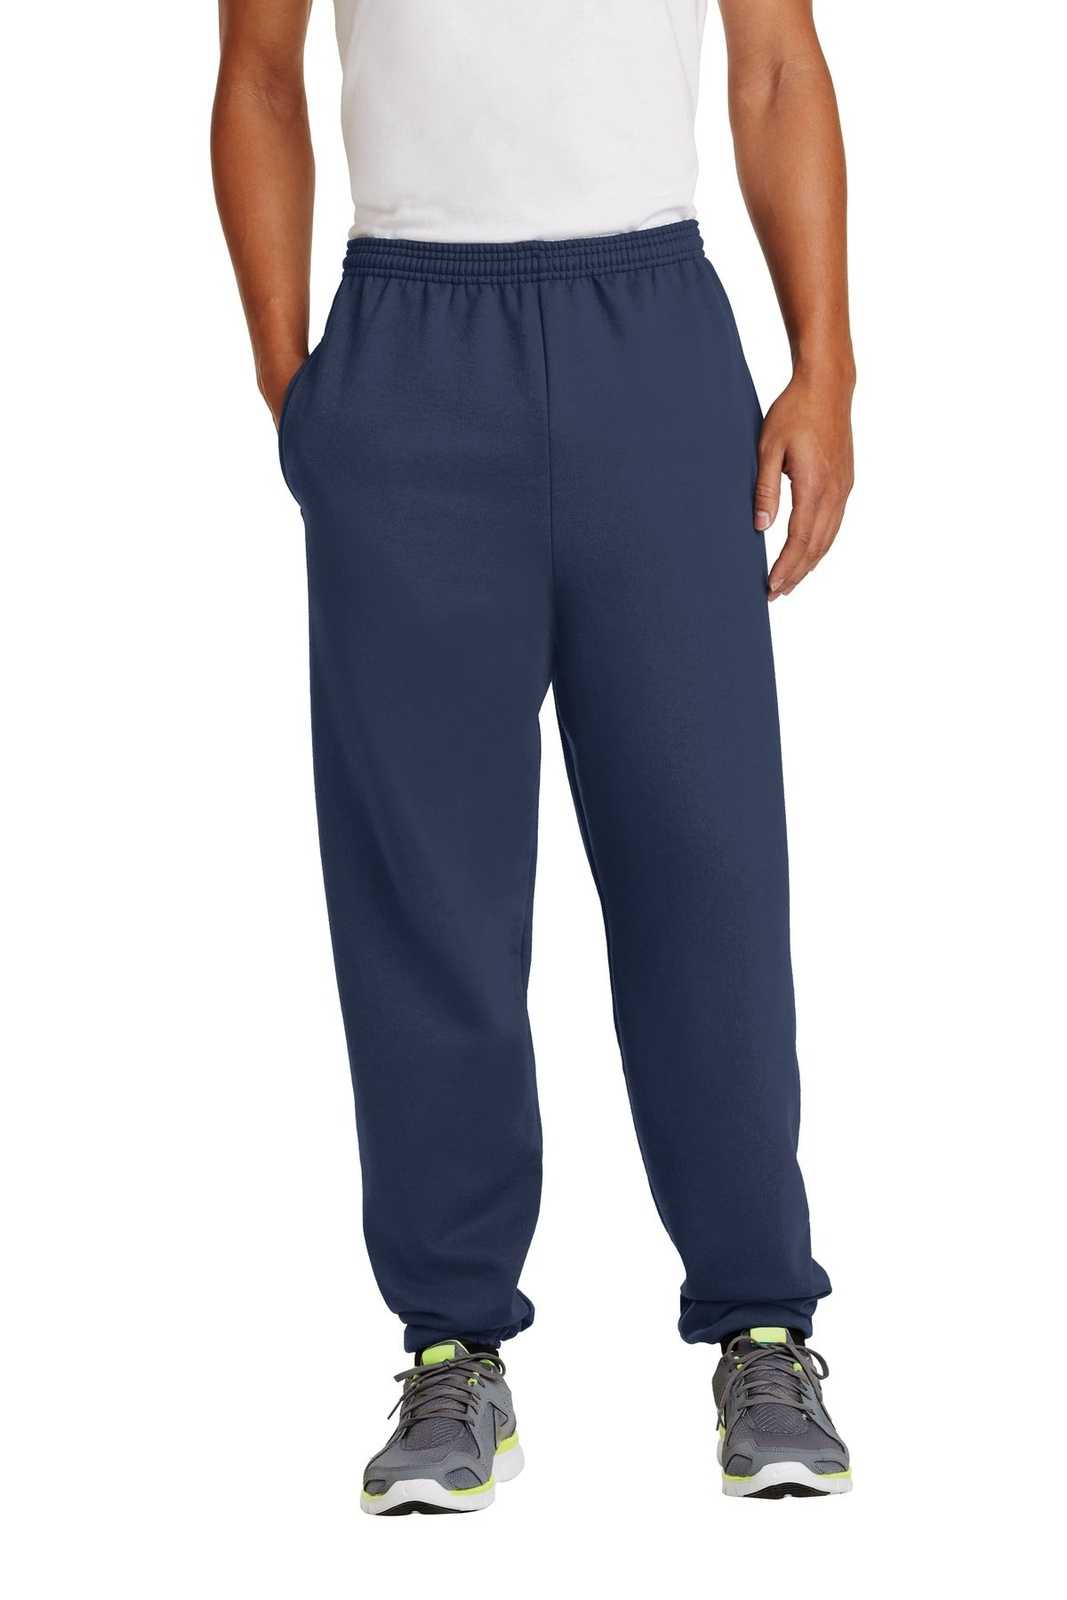 Port &amp; Company PC90P Essential Fleece Sweatpant with Pockets - Navy - HIT a Double - 1